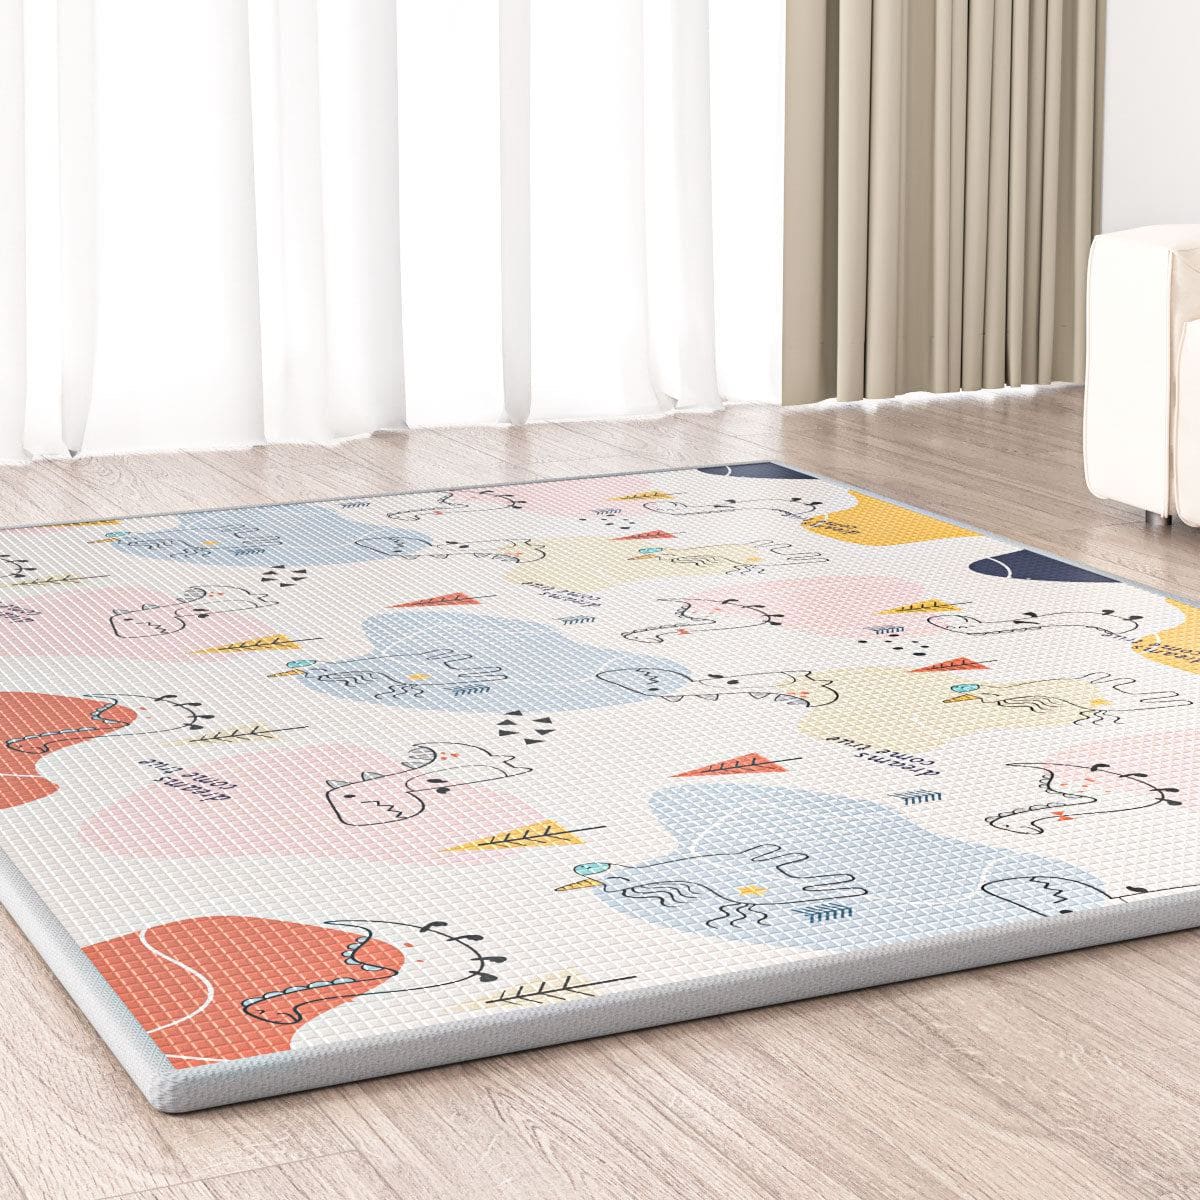 Large Crawling Mat Play Mat - Double Sided, Waterproof